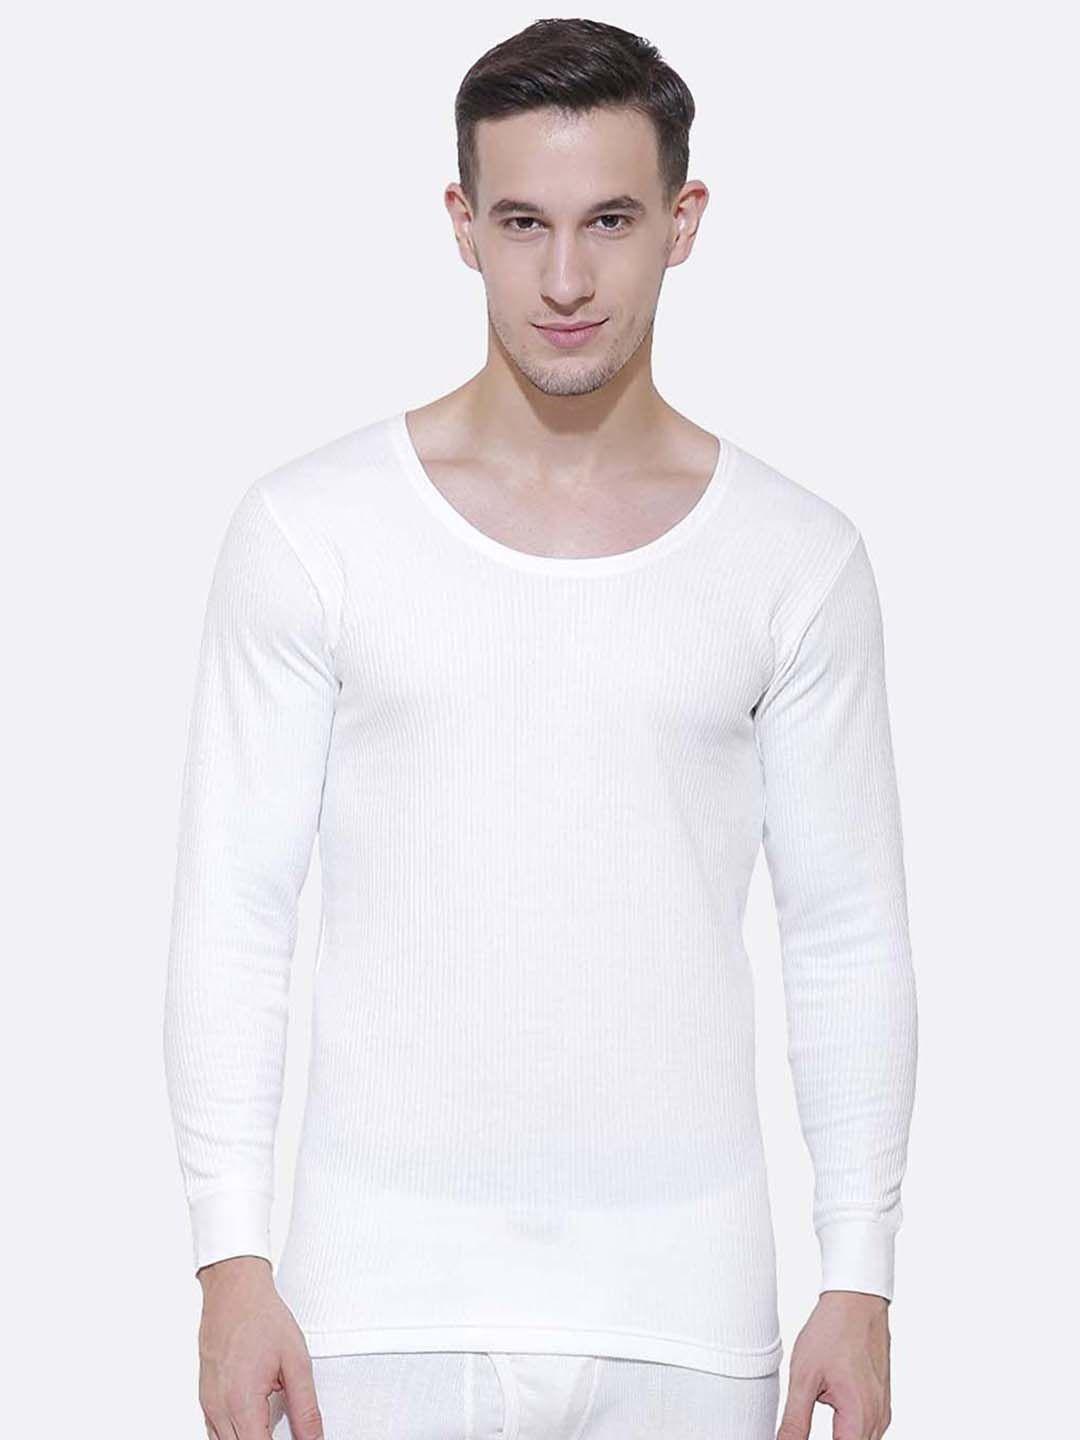 bodycare insider men cotton knitted thermal tops